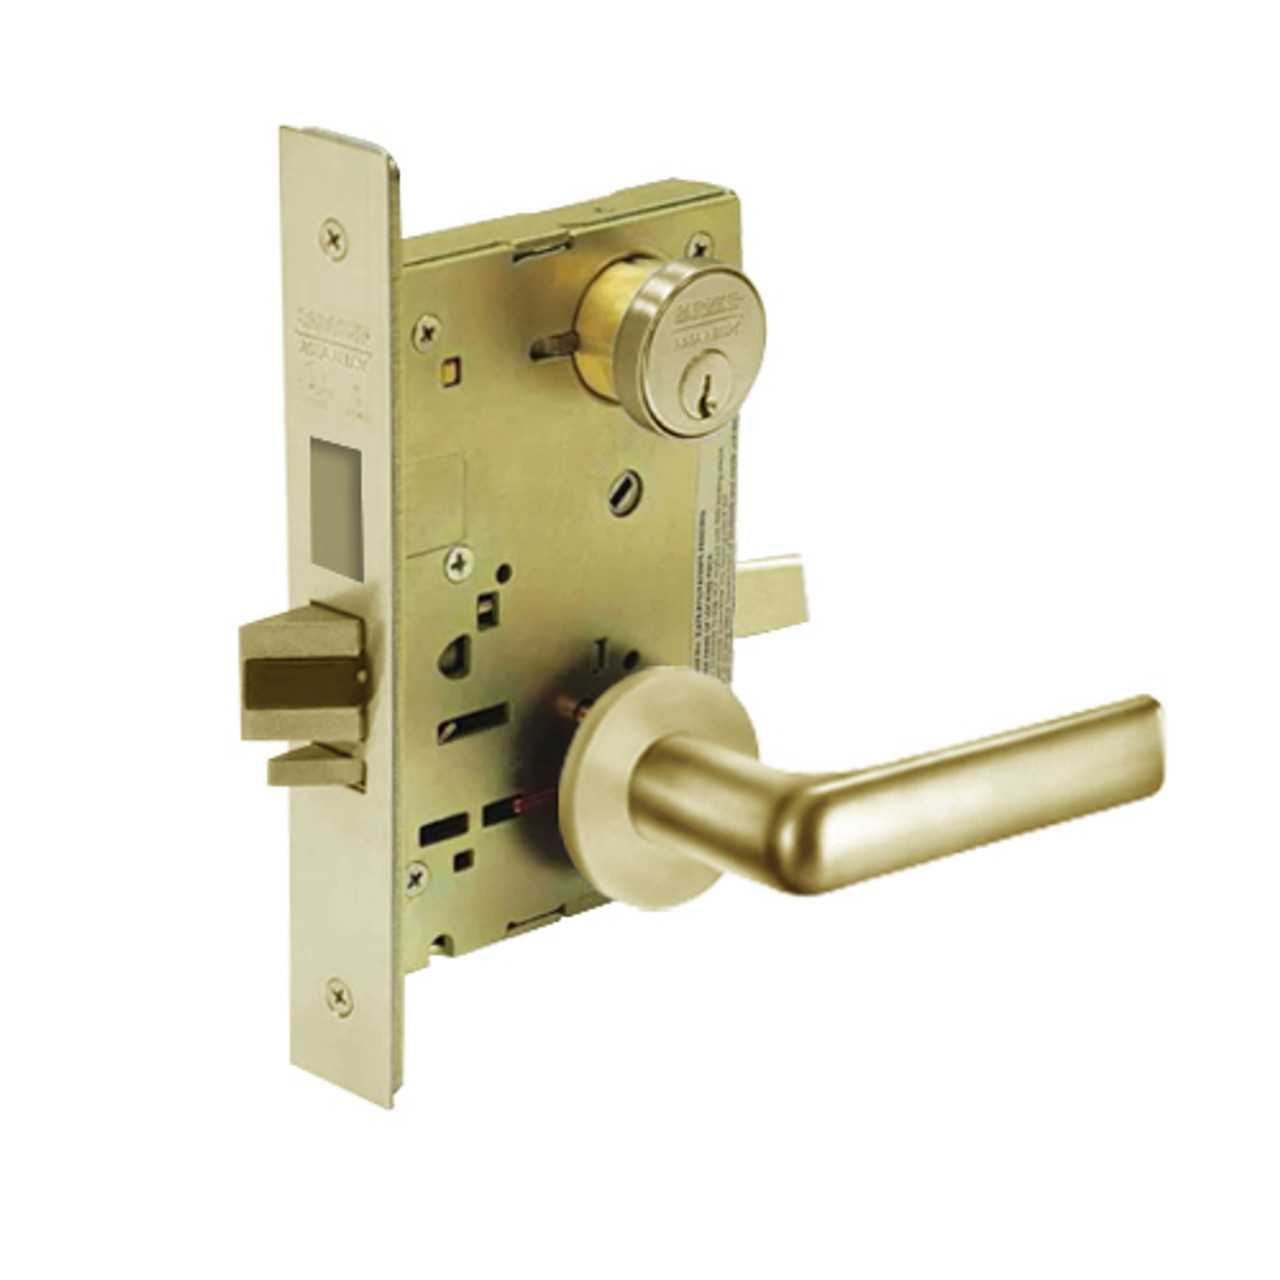 8249-LNE-04 Sargent 8200 Series Security Deadbolt Mortise Lock with LNE Lever Trim in Satin Brass